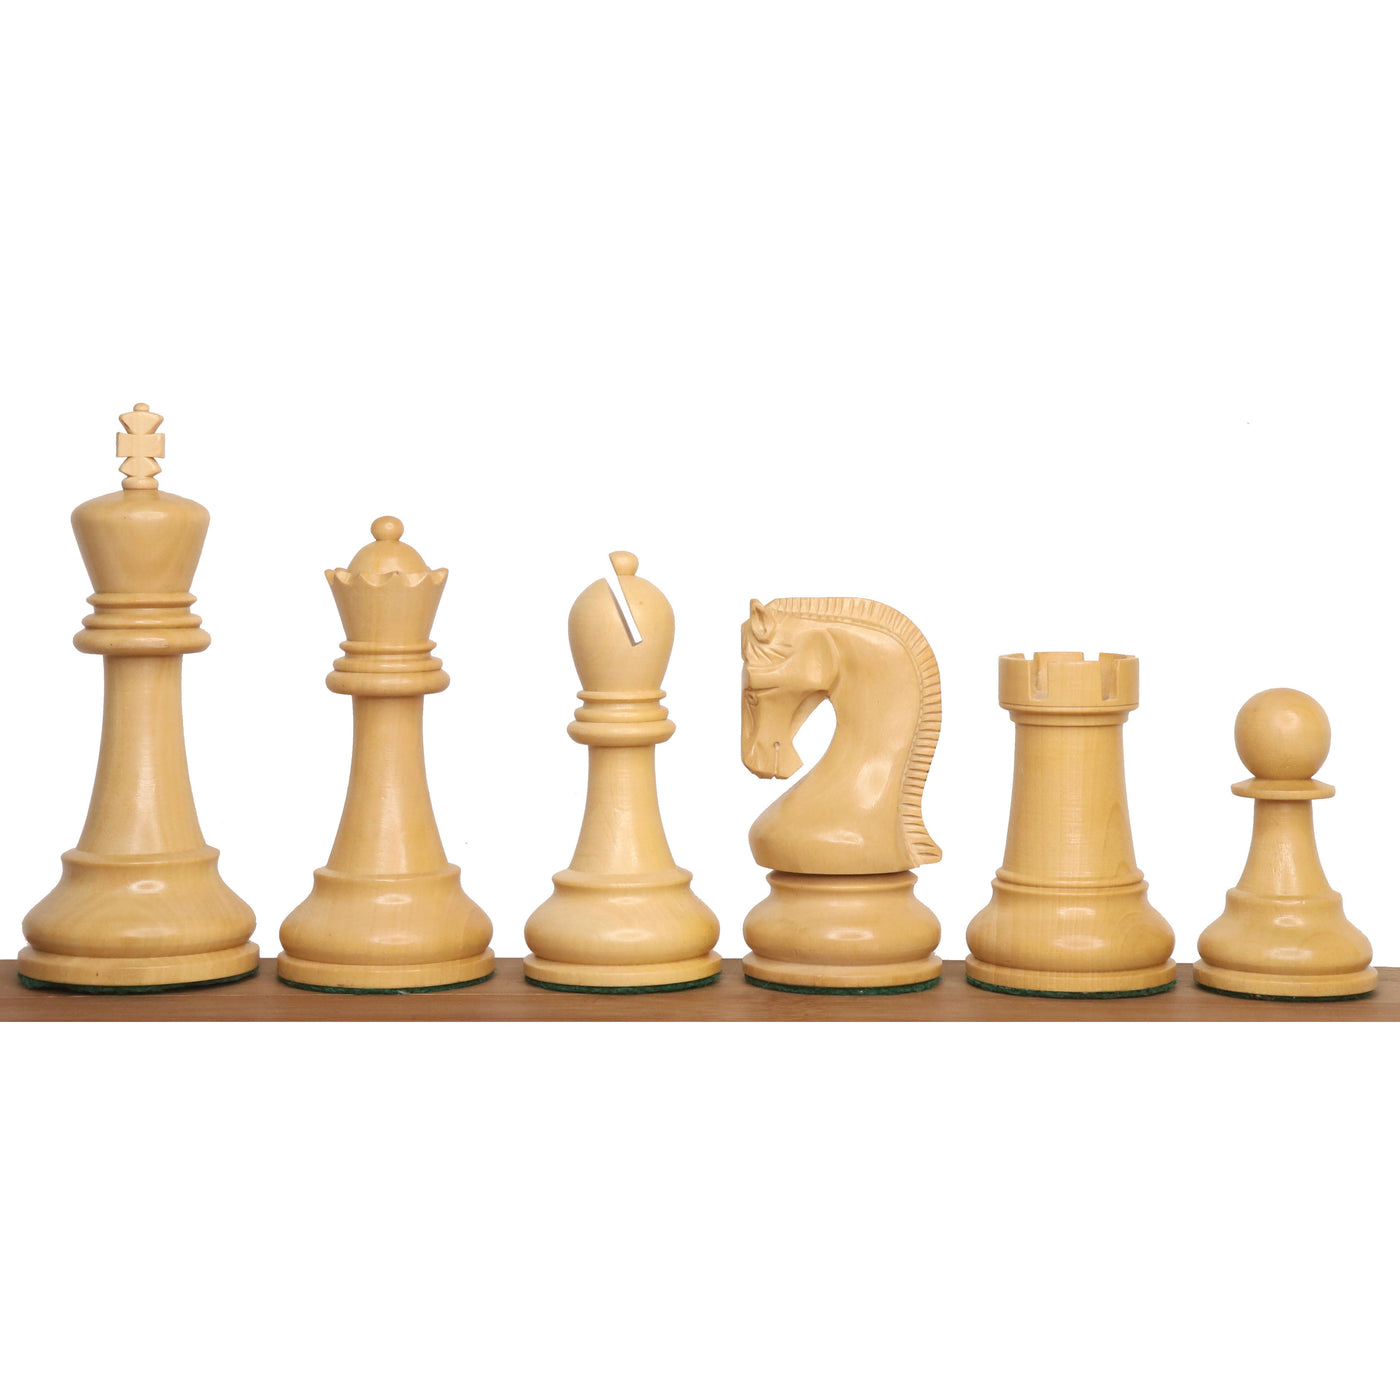 Combo of 4" Leningrad Staunton Chess Set - Pieces in Golden Rosewood with Board and Box